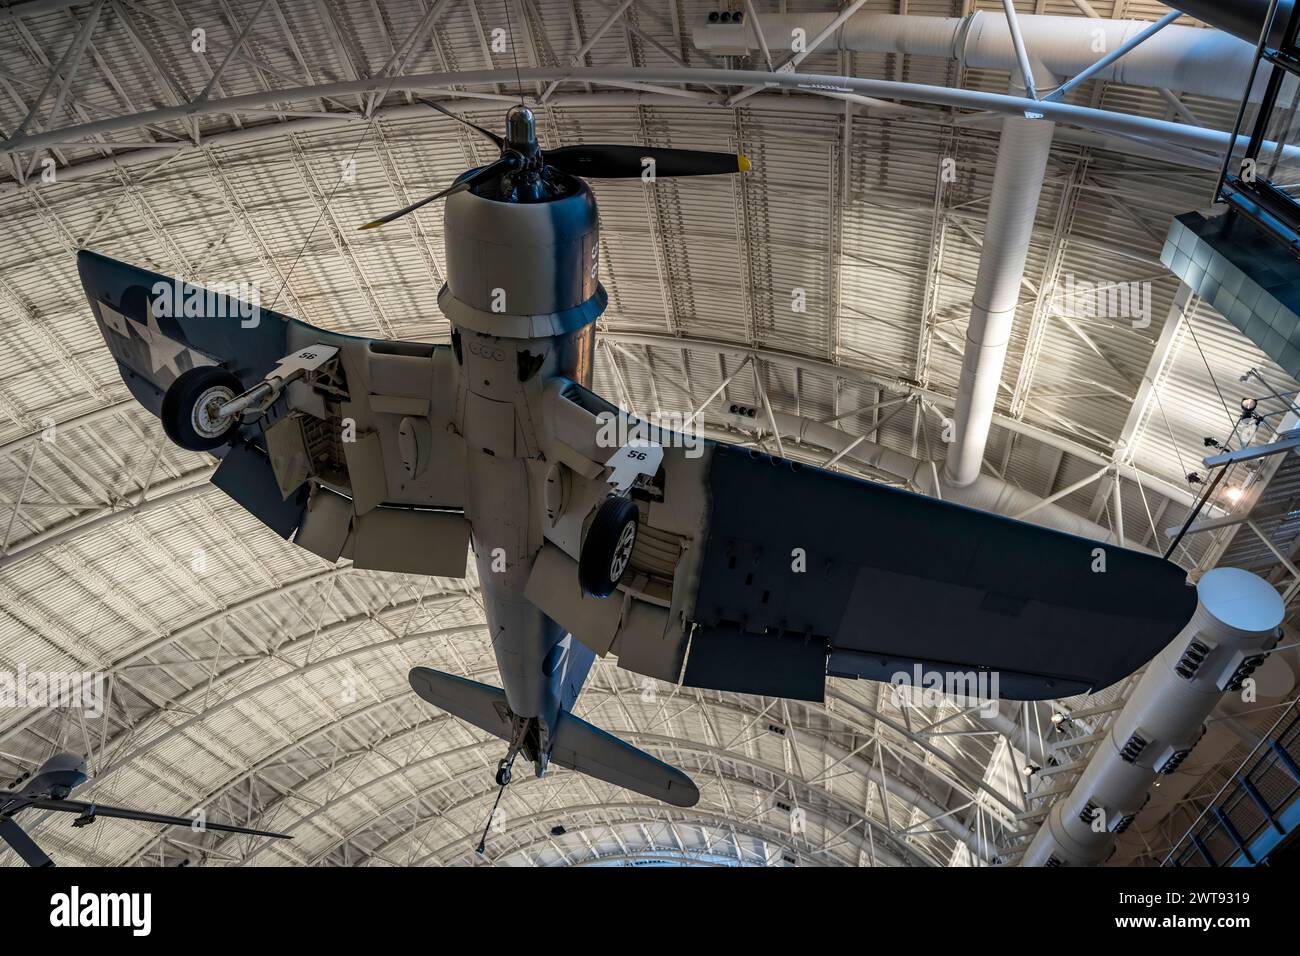 A vintage Vought F4U-1D Corsair fighter aircraft hangs from the ceiling at the Steven F. Udvar-Hazy Center, National Air and Space Museum. Stock Photo